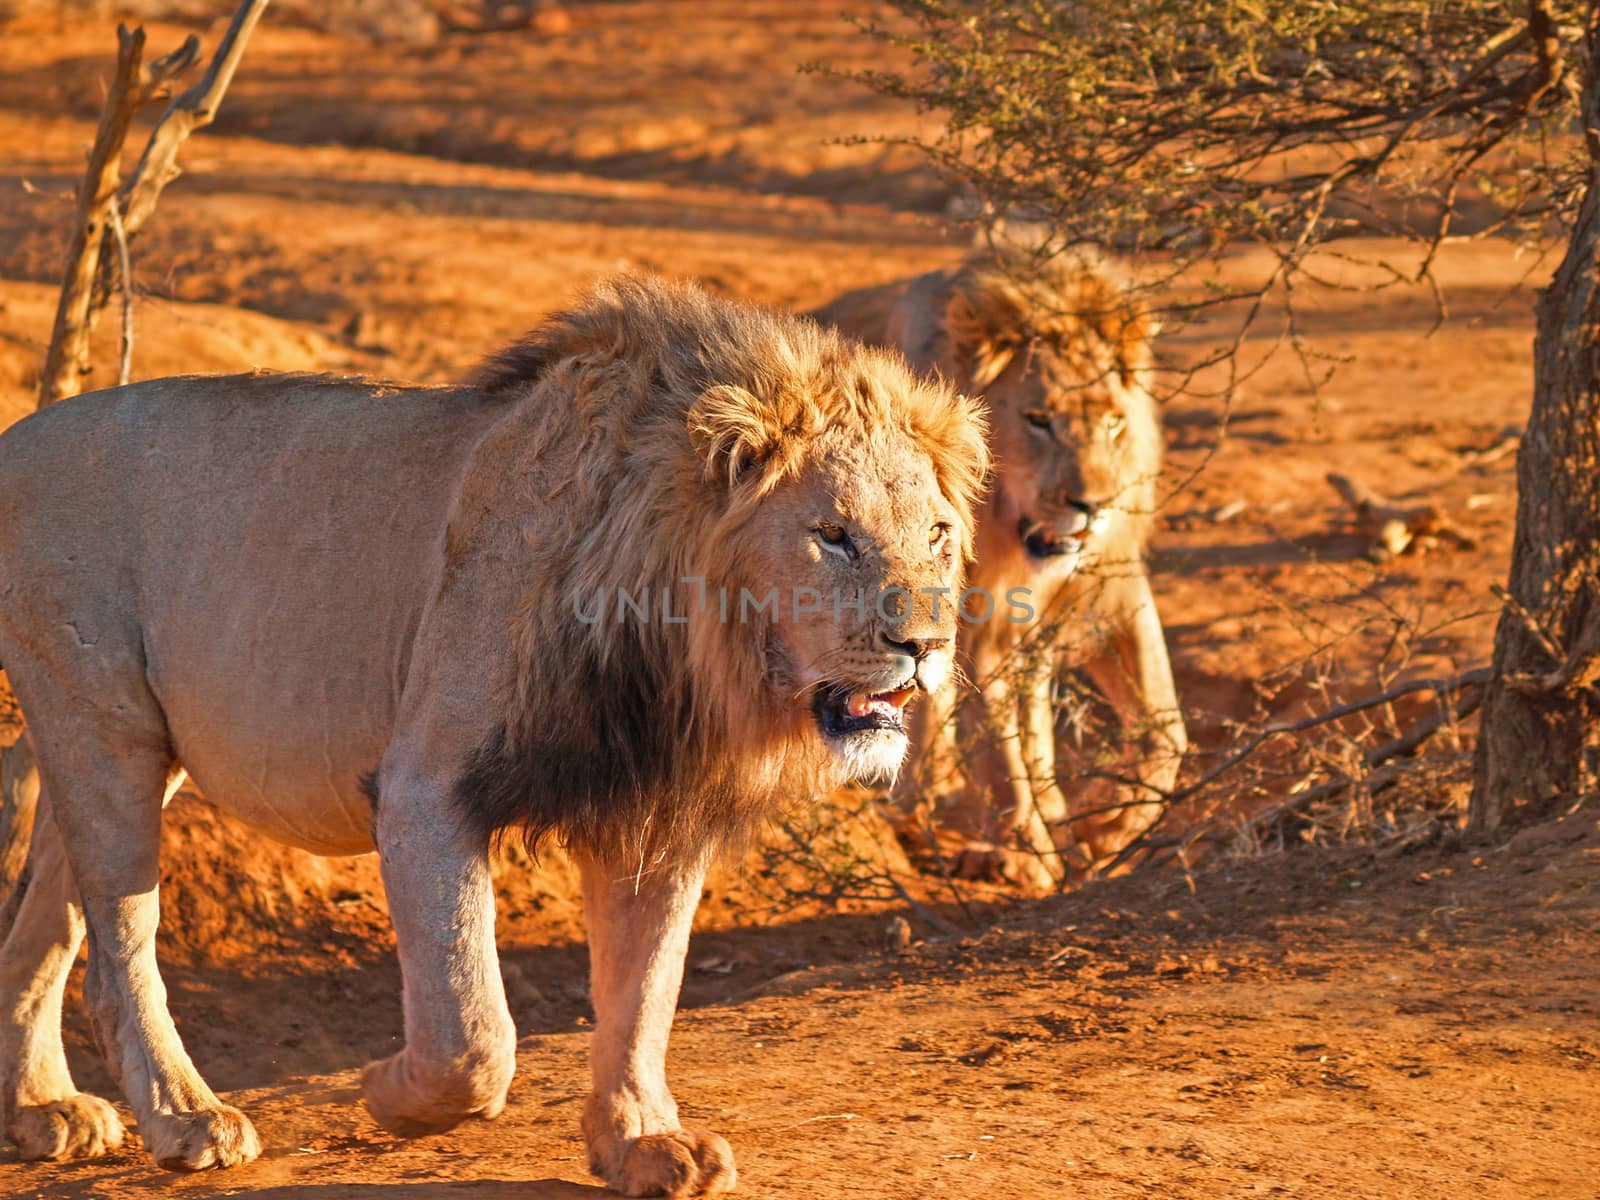 Two leisurely male lions walking together in heat of African day by brians101